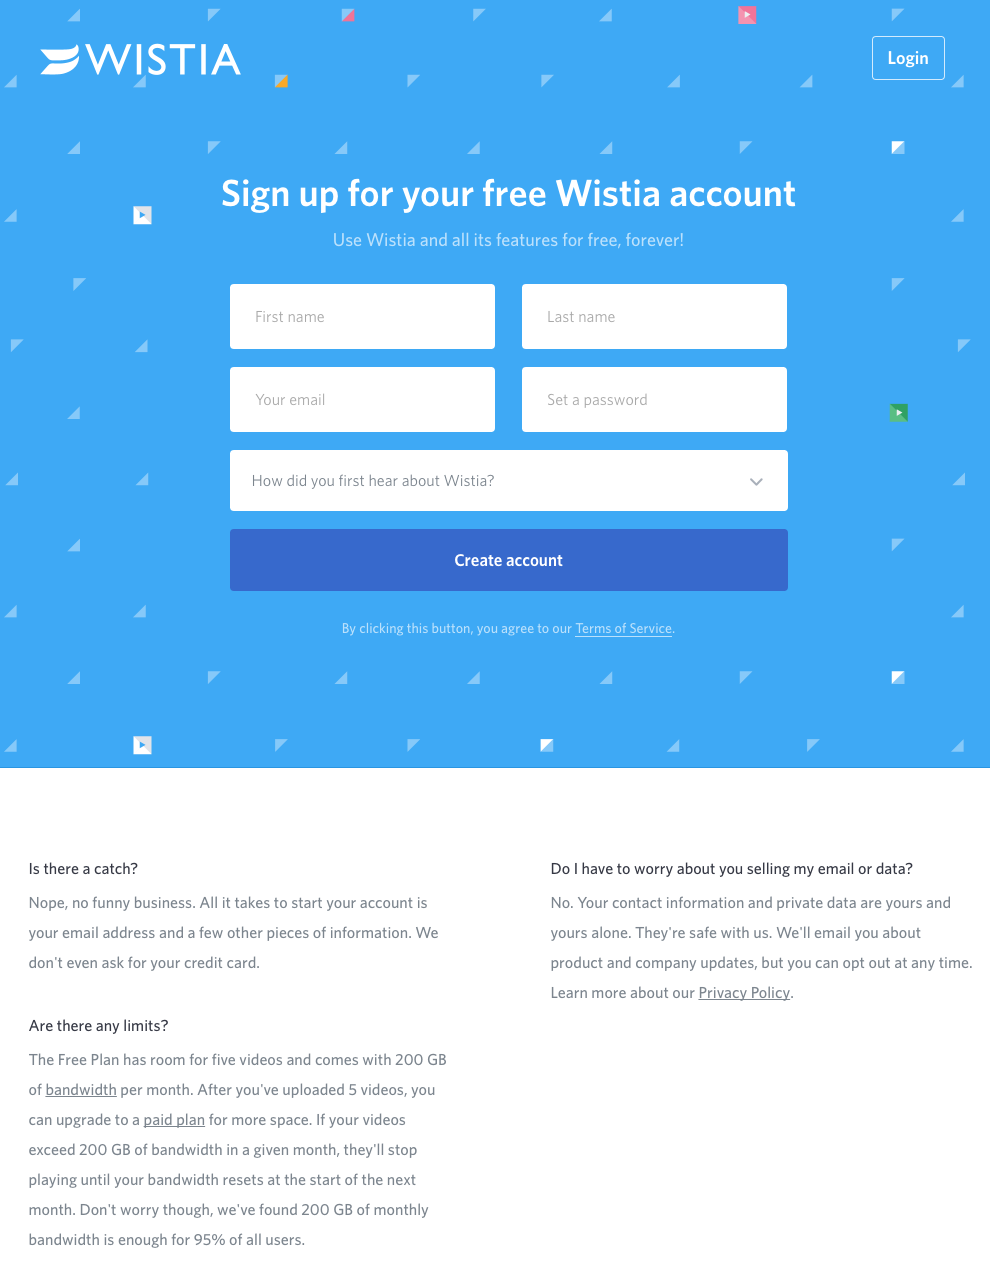 wisita-landing-page-example.png "width =" 660 "caption =" false "data-constrained =" true "style =" width: 660px;